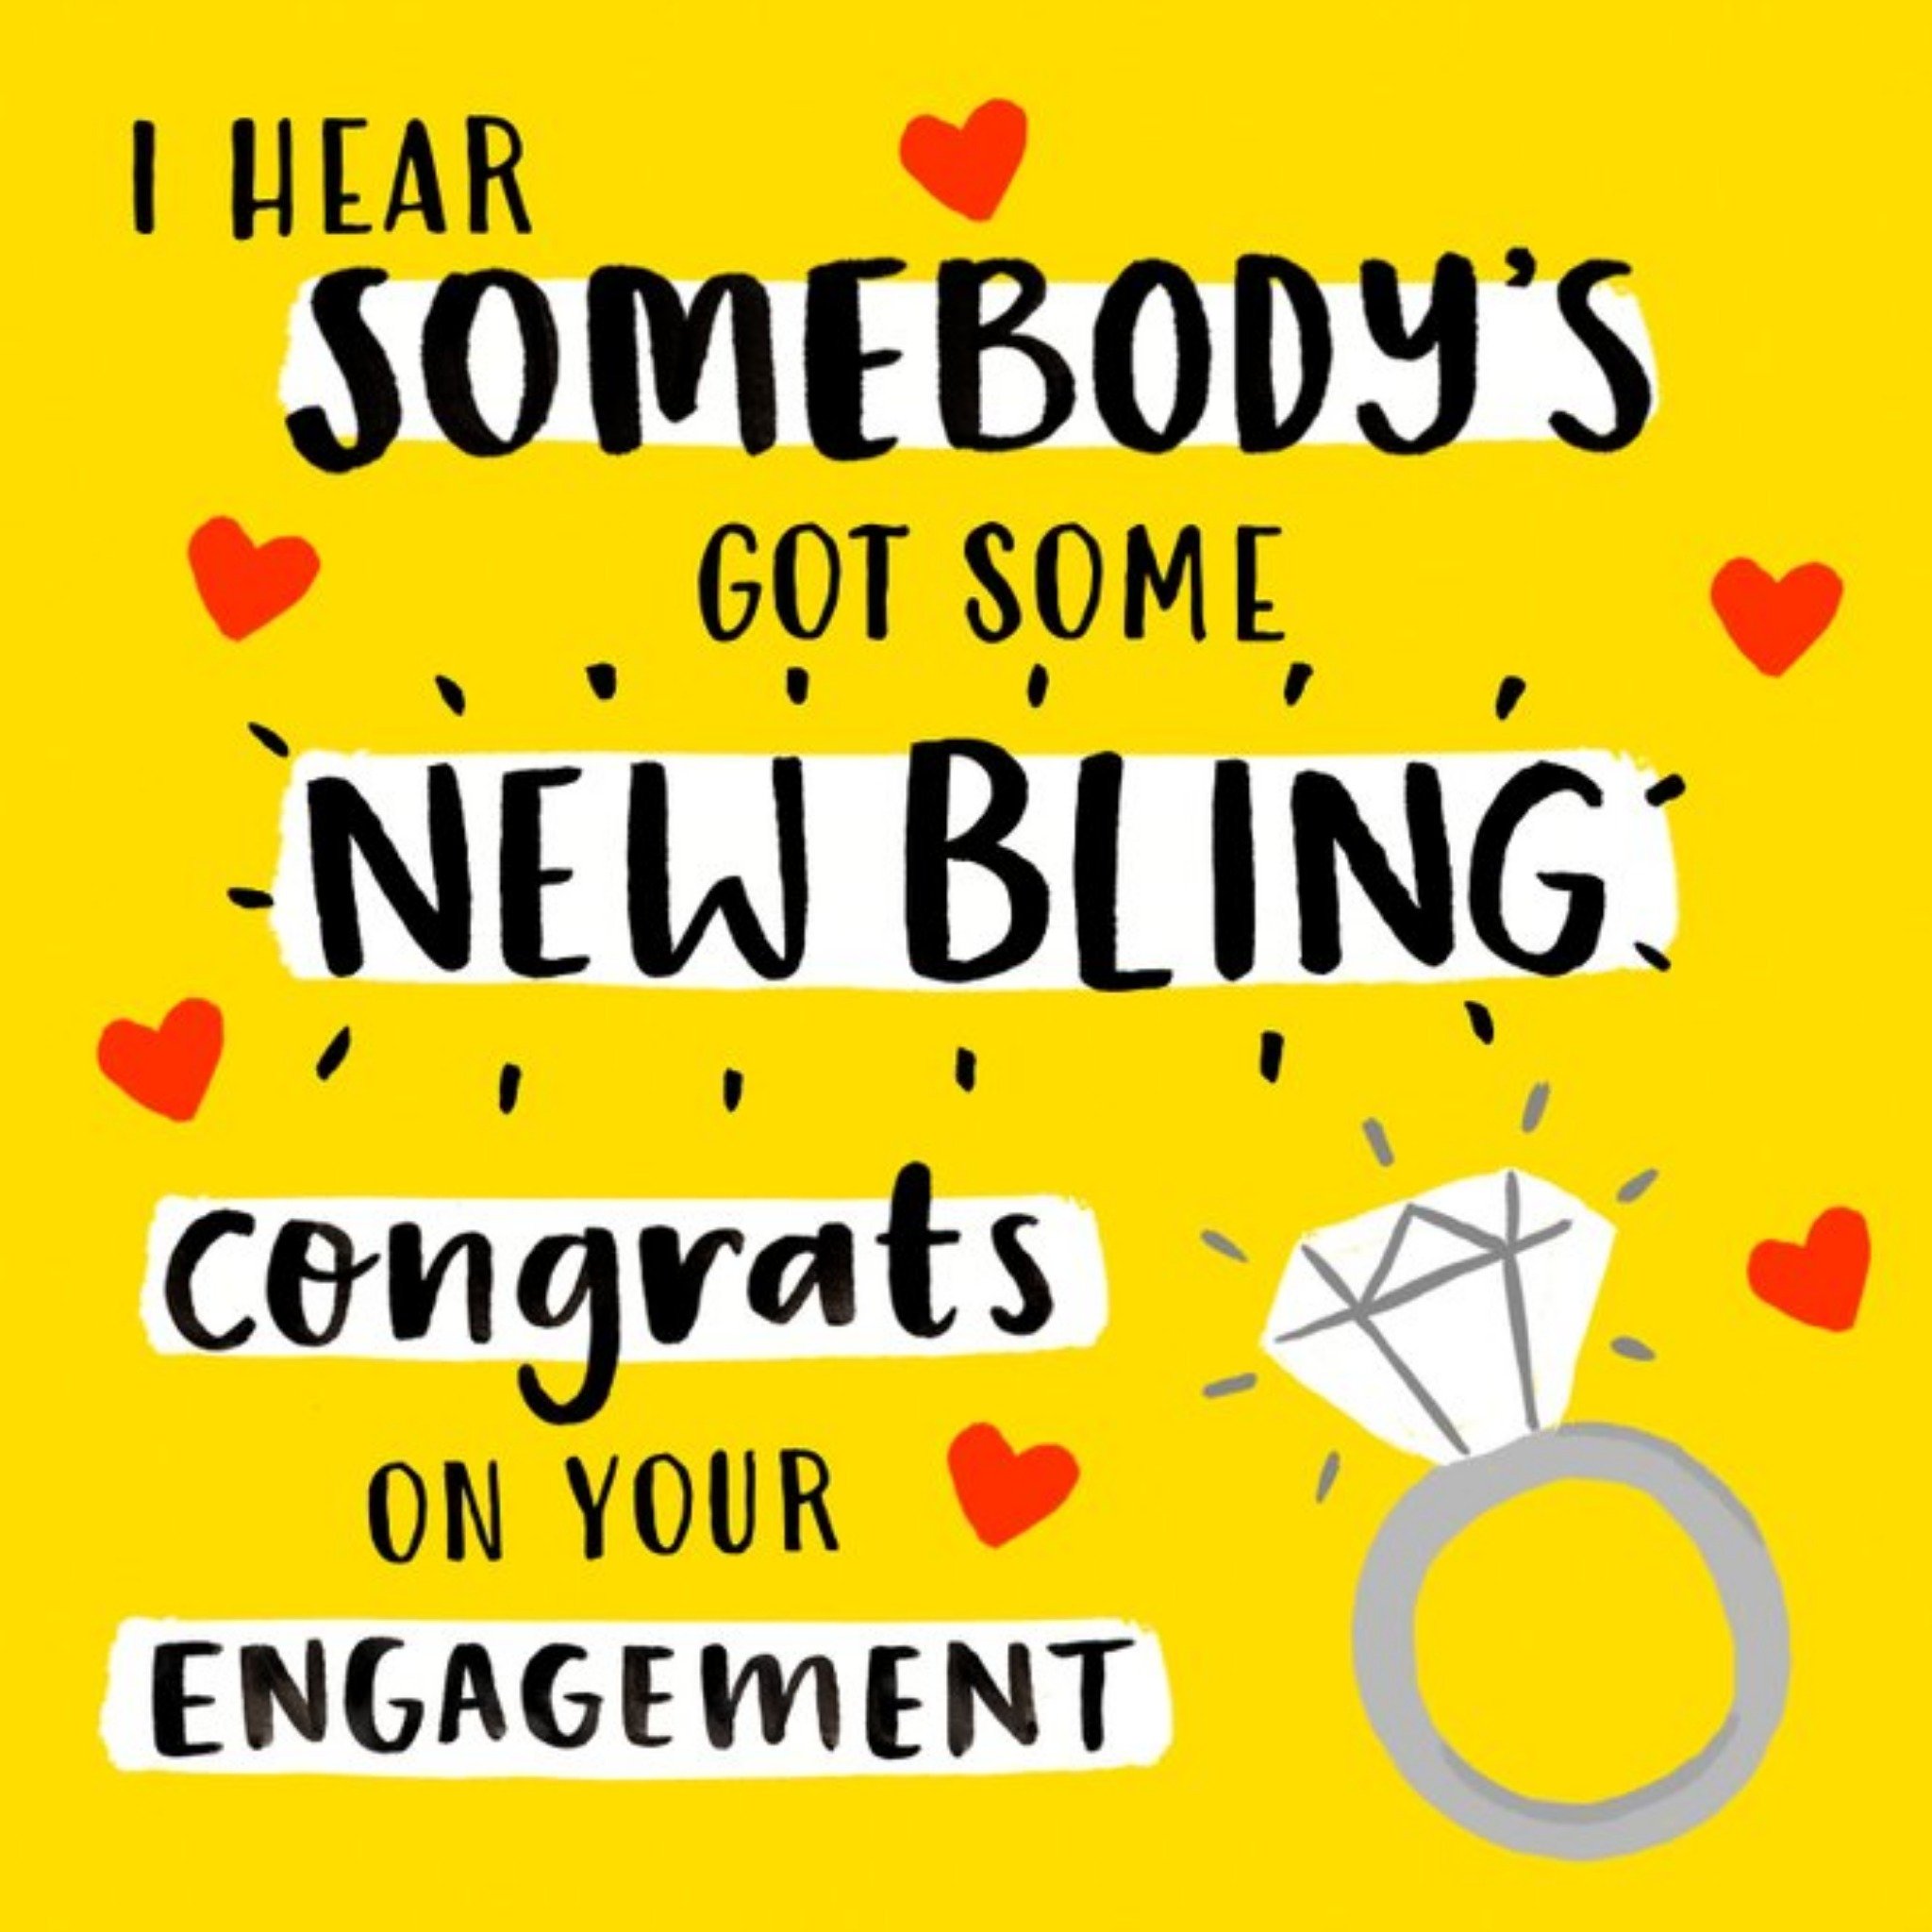 Moonpig Claire Nicholson Hearts Ring Engagement Card, Large